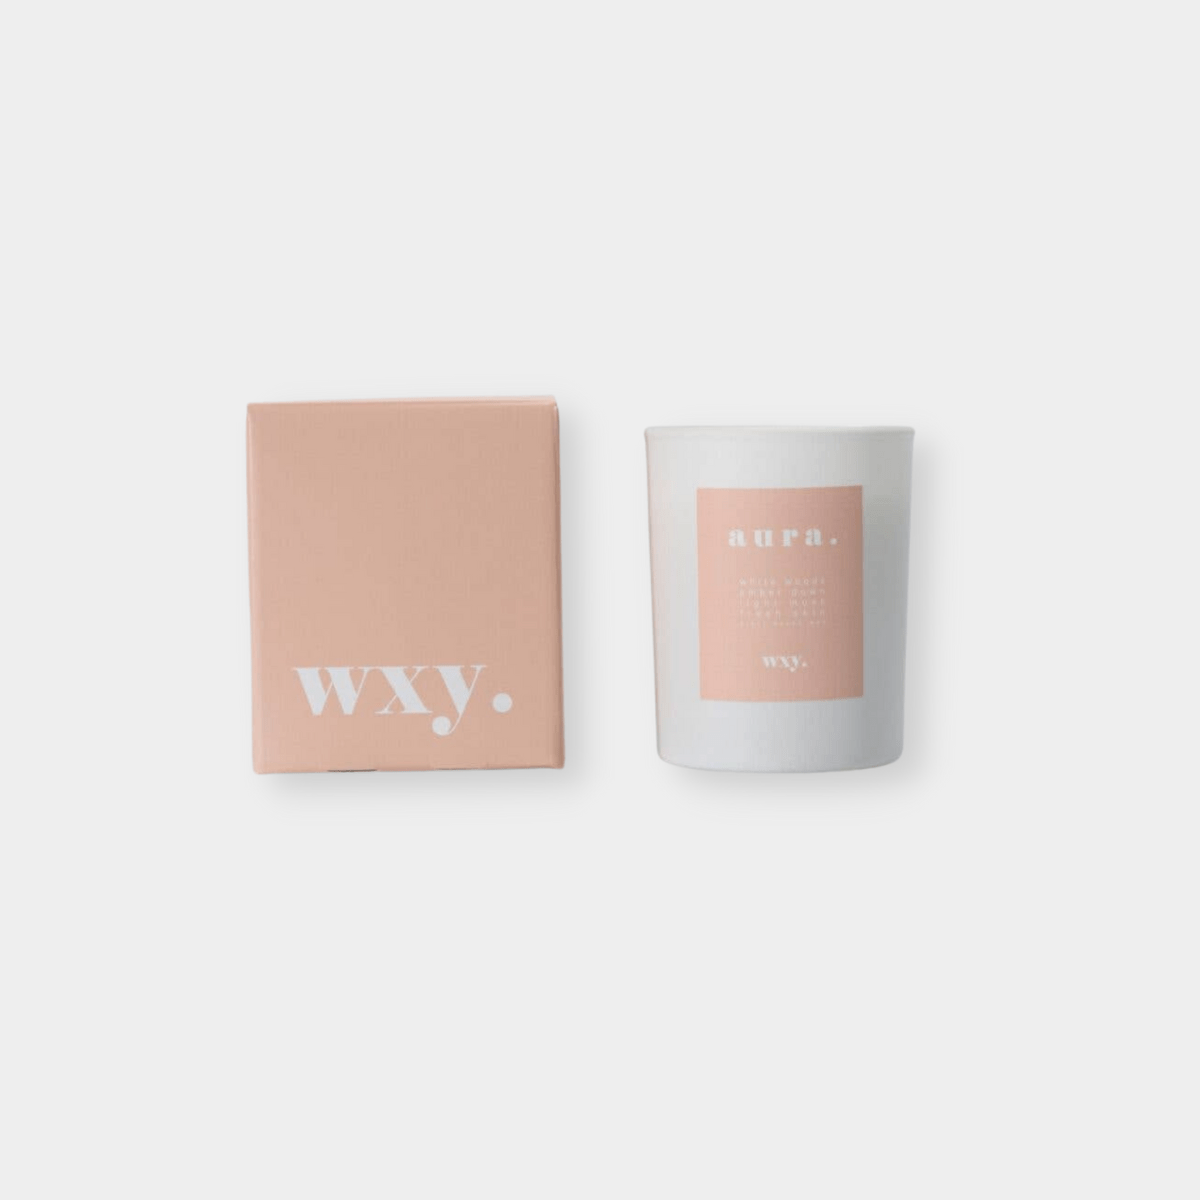 wxy. Accessories wxy. Aura Candle - White Woods & Amber Down (7817468870905)